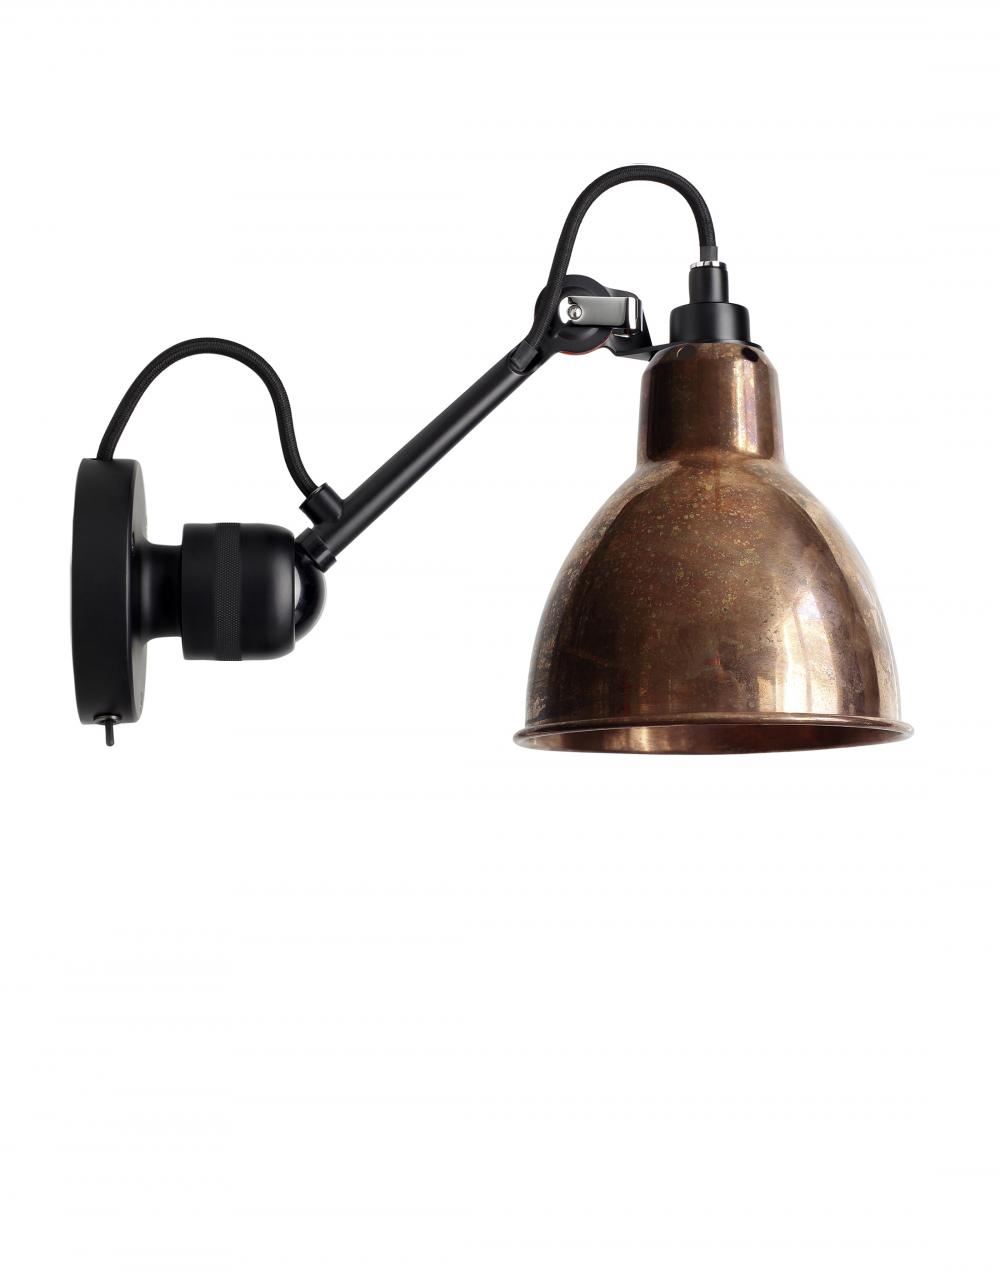 Lampe Gras 304 Small Wall Light Black Arm Raw Copper Shade With White Interior Round Integral Switch